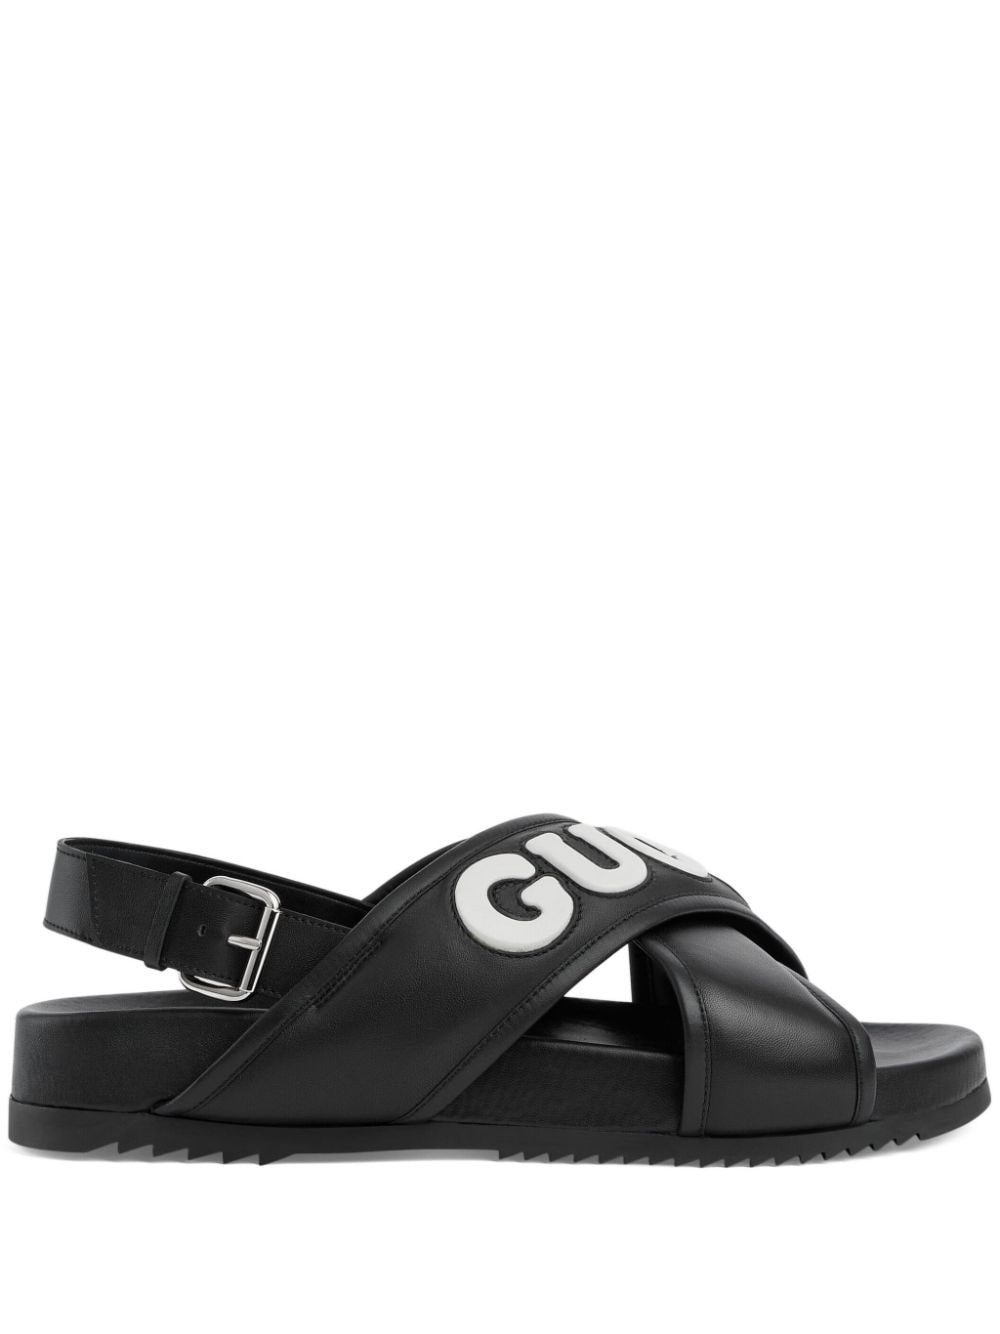 Gucci Crossover Strapped Sandals In Black